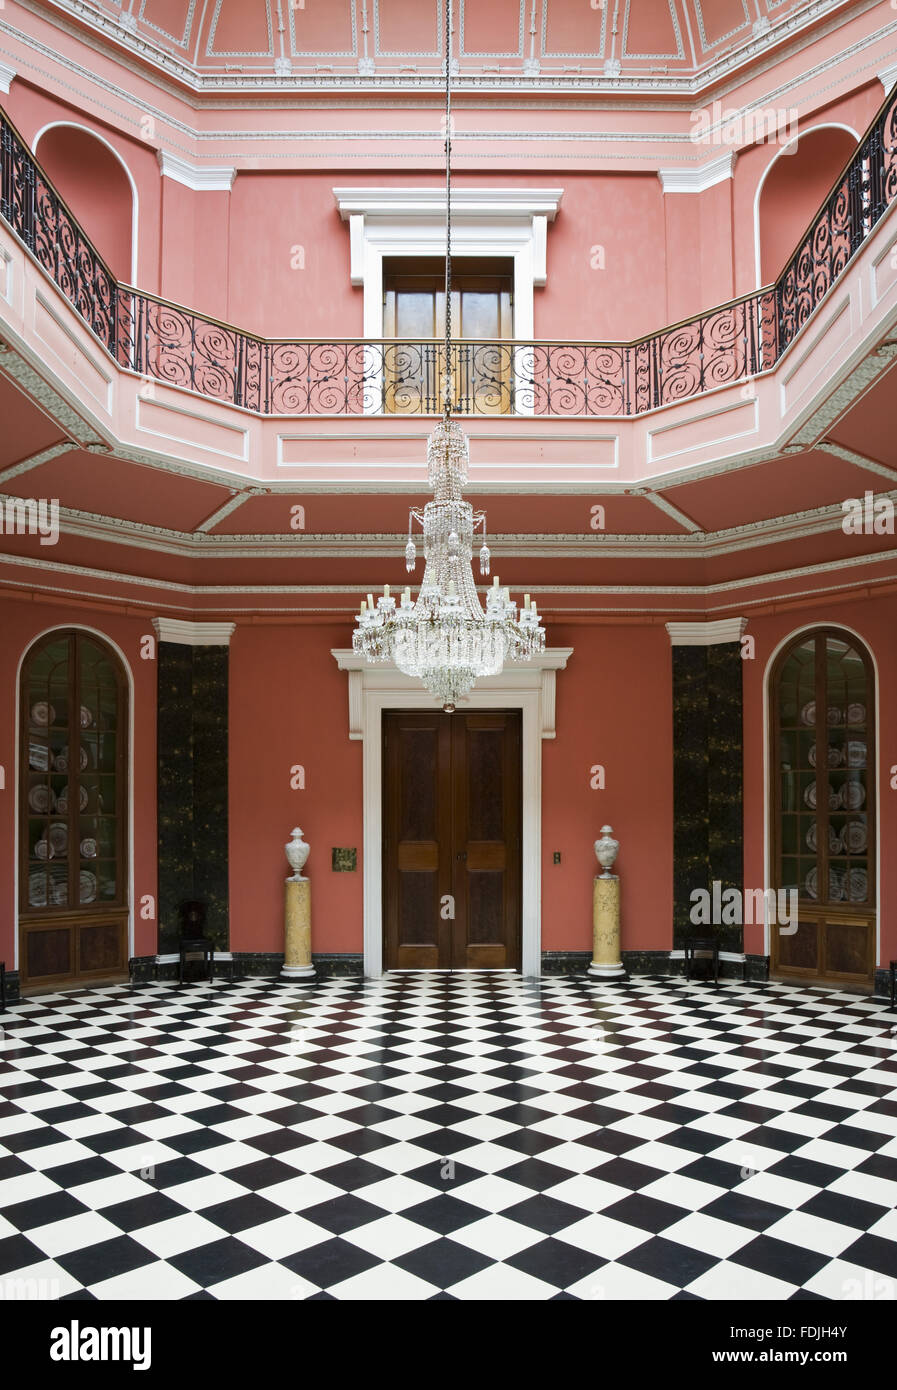 The Hall at Mount Stewart House, Co. Down, Northern Ireland. The room is a vast octagon with painted Ionic columns and was designed by William Vitruvius Morrison in classical style. Stock Photo